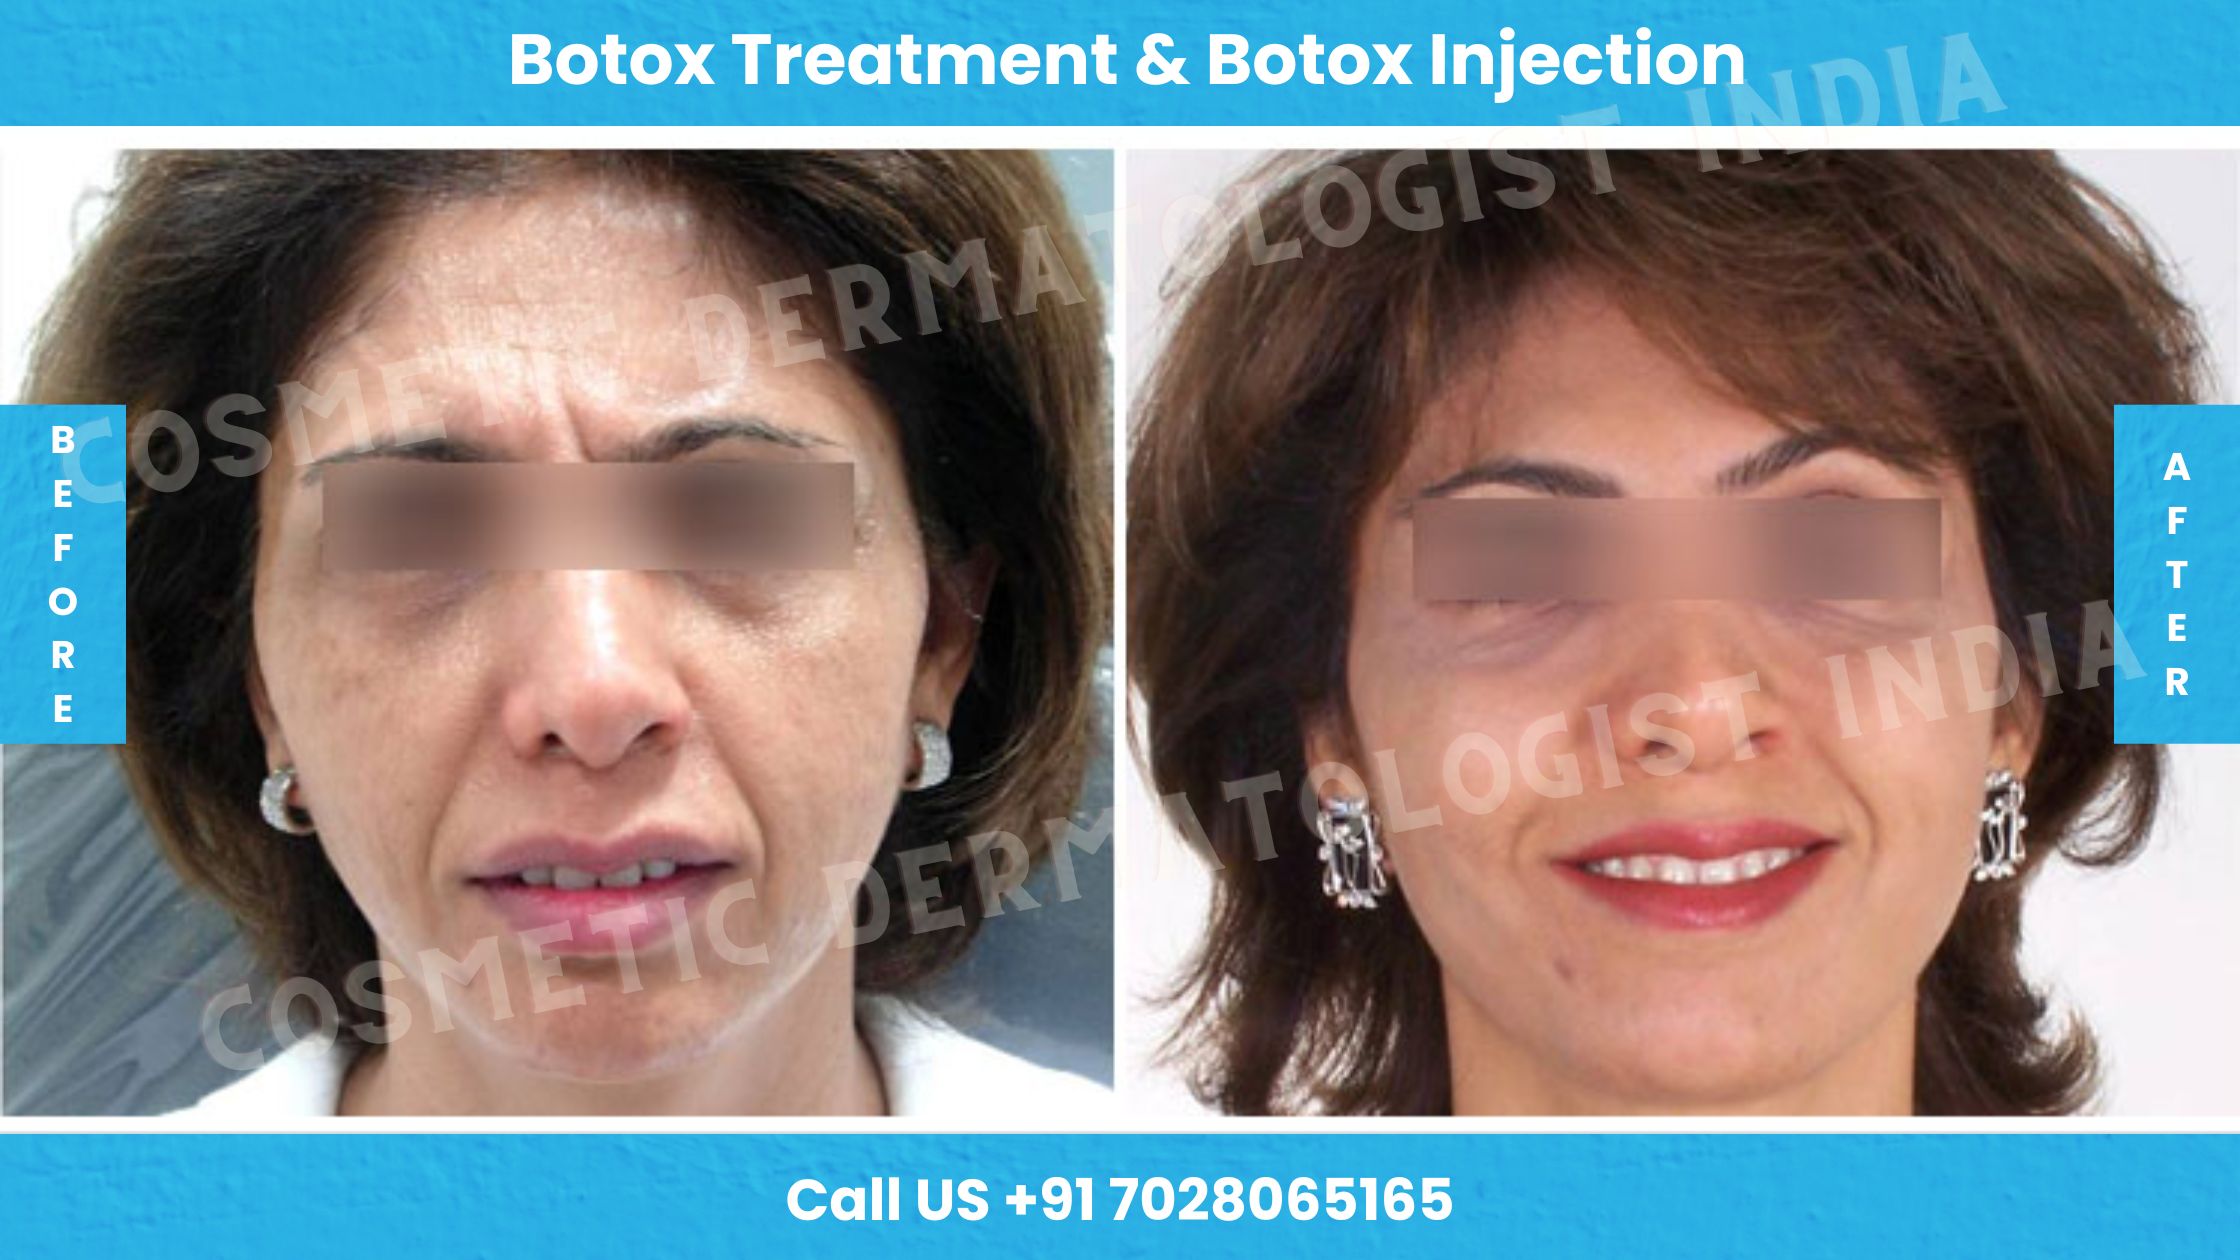 Before and After Images of Botox Treatment & Botox Injection